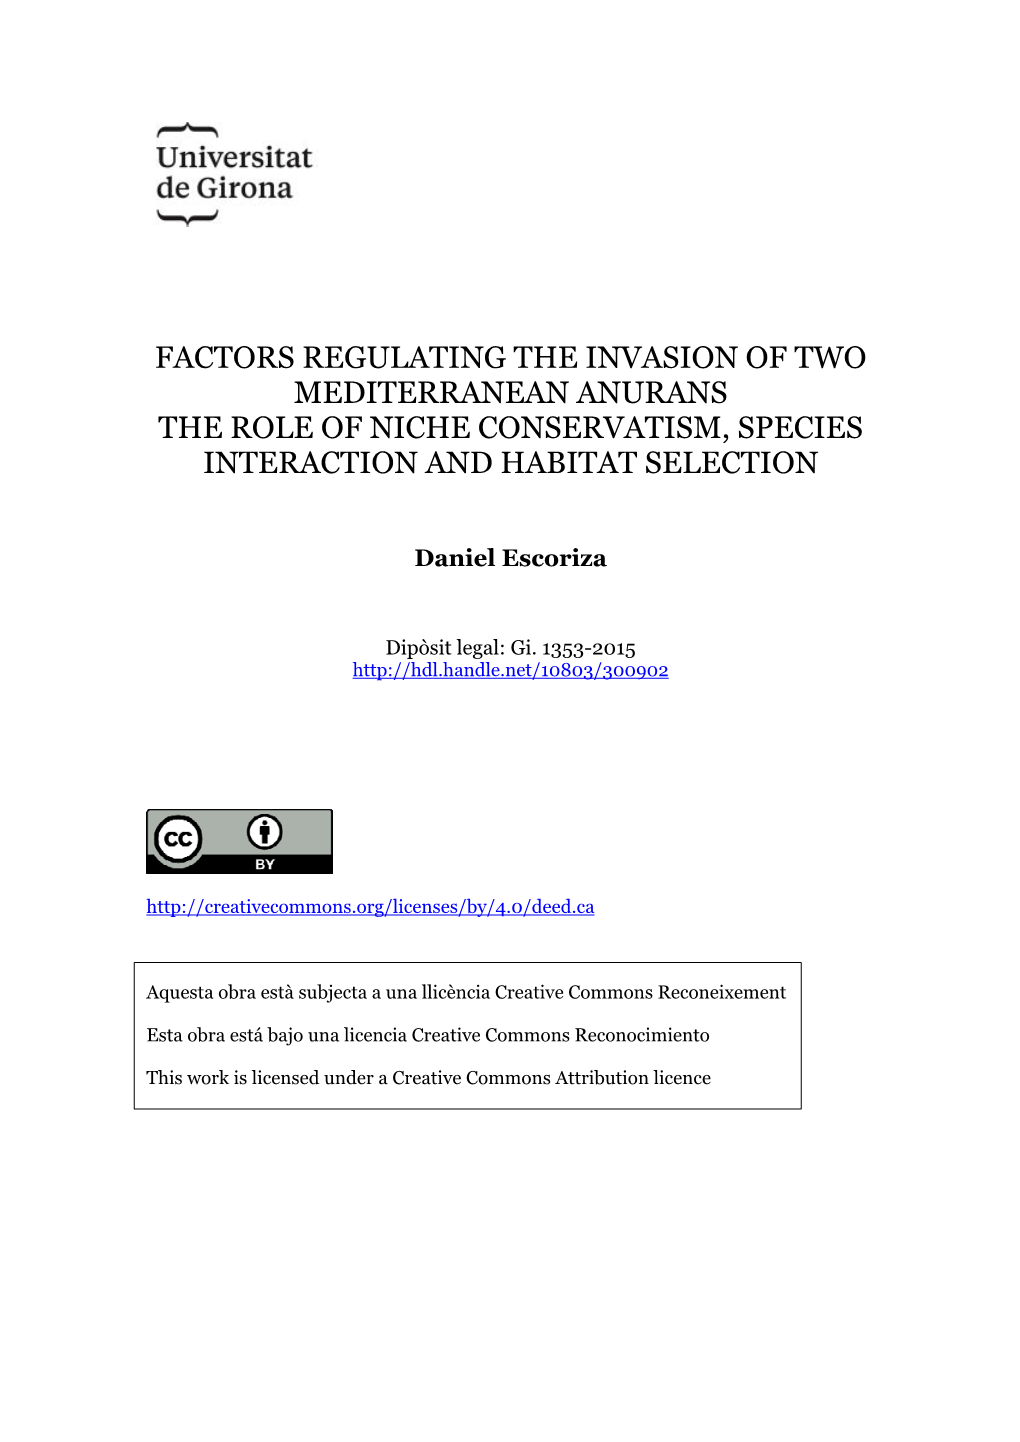 Factors Regulating the Invasion of Two Mediterranean Anurans the Role of Niche Conservatism, Species Interaction and Habitat Selection